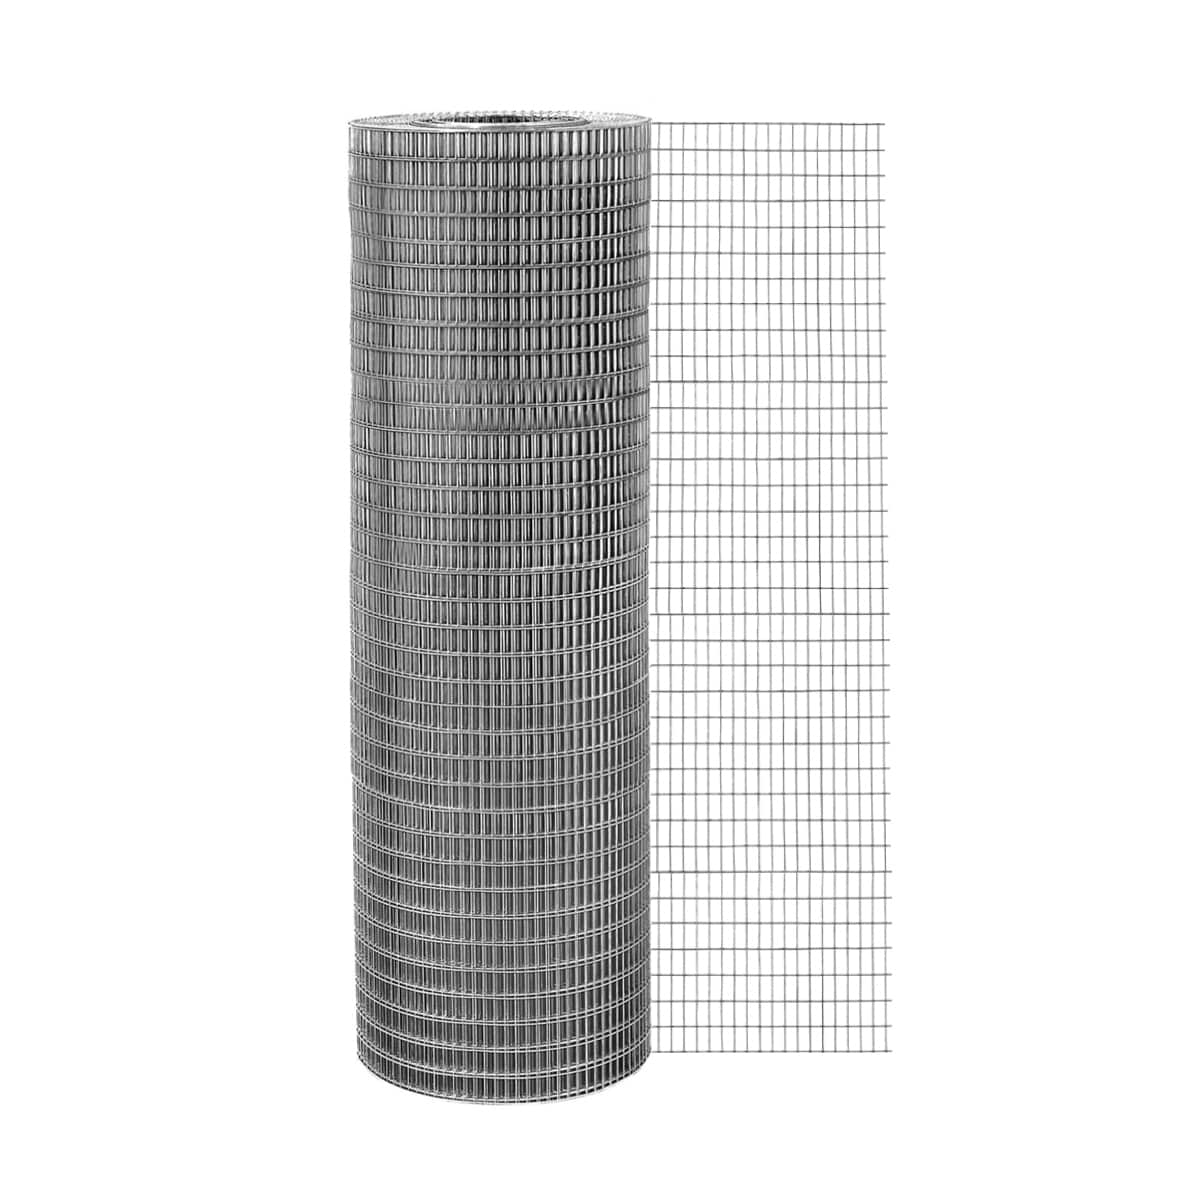 GARDEN CRAFT 50-ft x 4-ft Steel Chicken Wire Rolled Fencing with Mesh Size  1-in in the Rolled Fencing department at